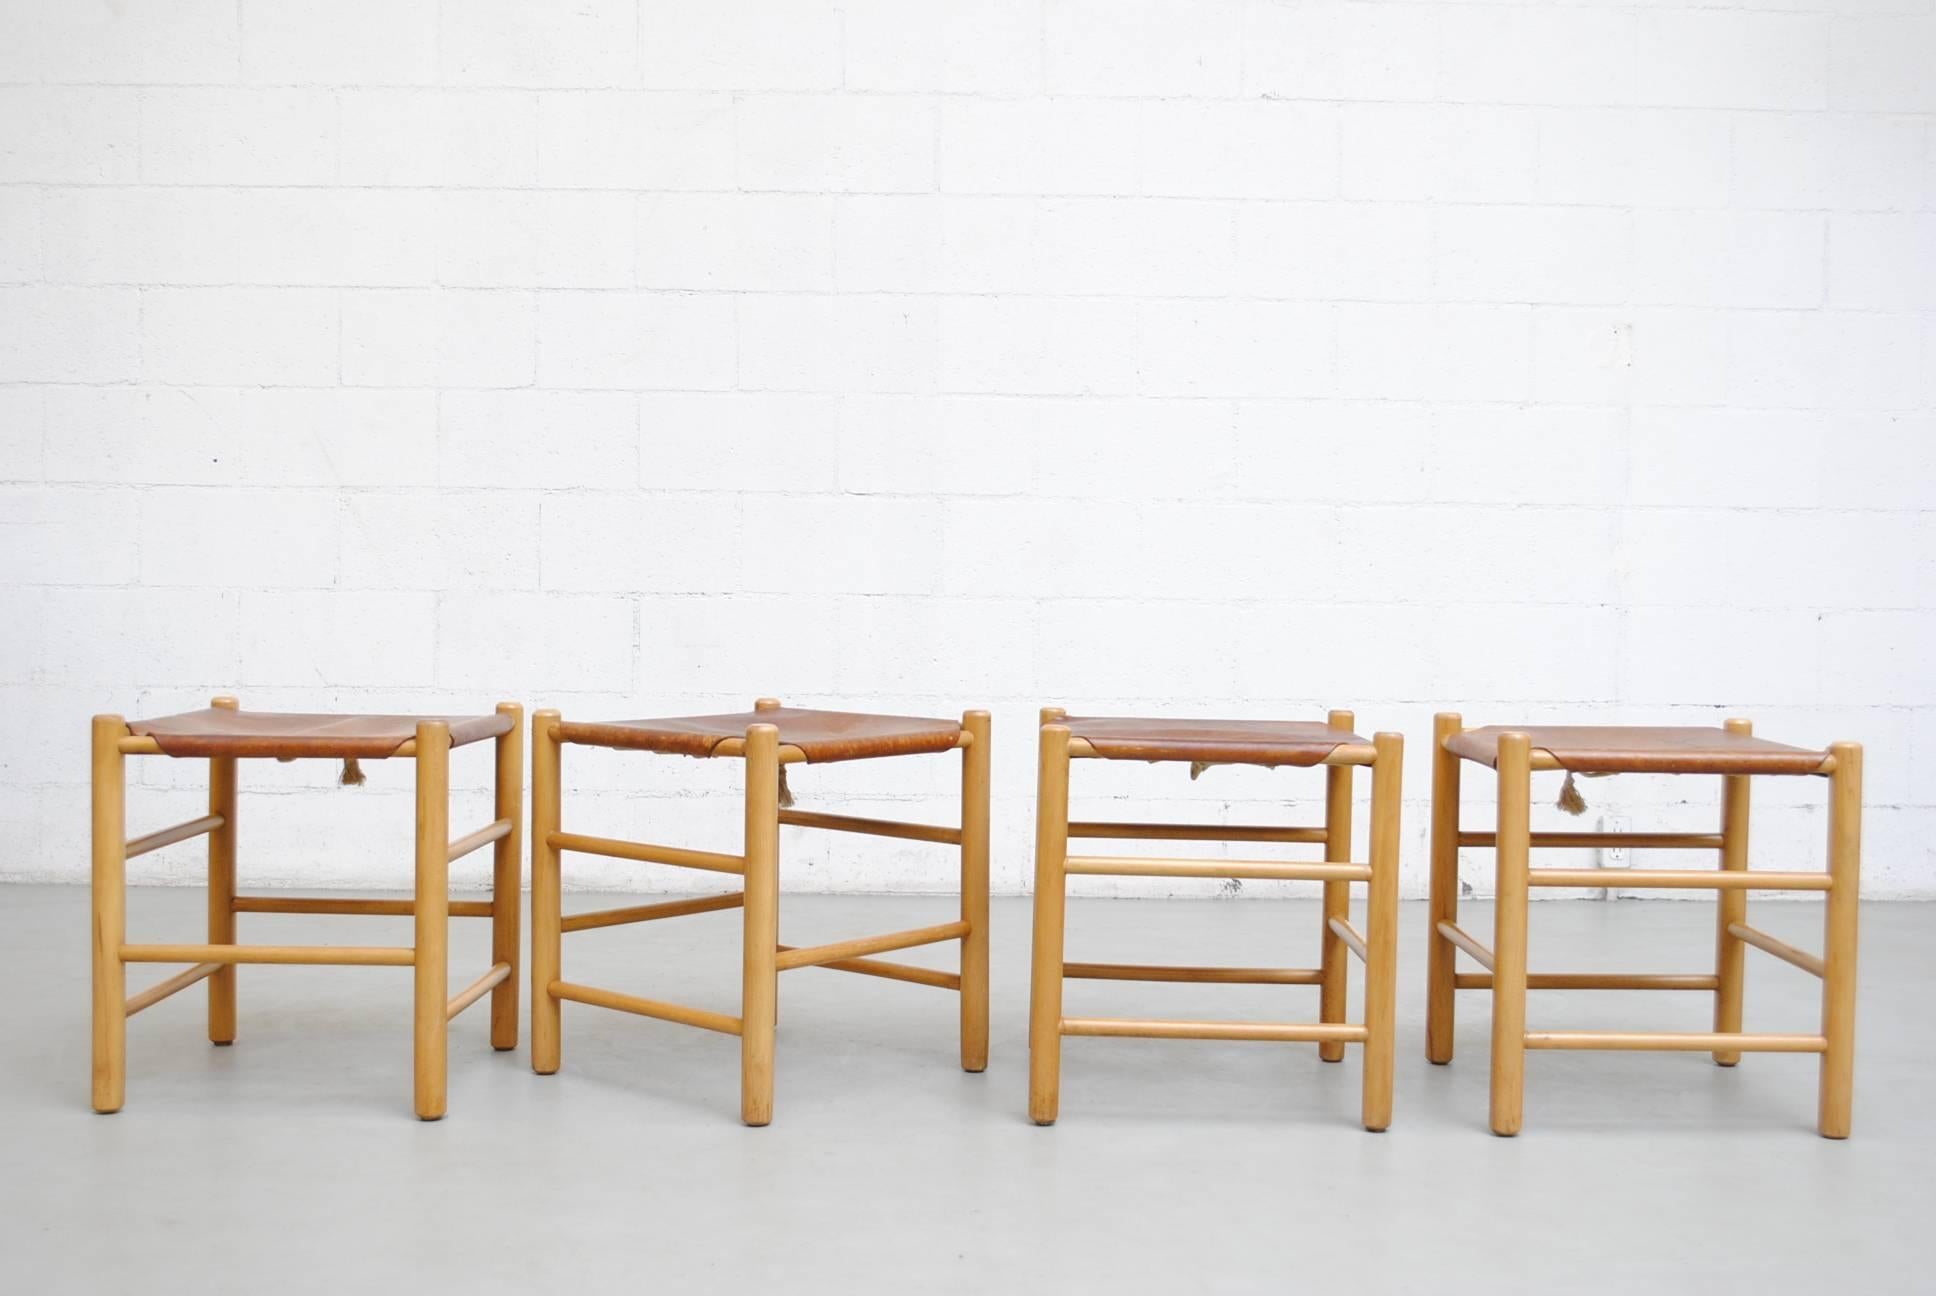 Four beautiful Charlotte Perriand style birch stools with natural leather seats. Visible wear and patina to the leather. Wood in original condition with wear consistent with their age and usage.